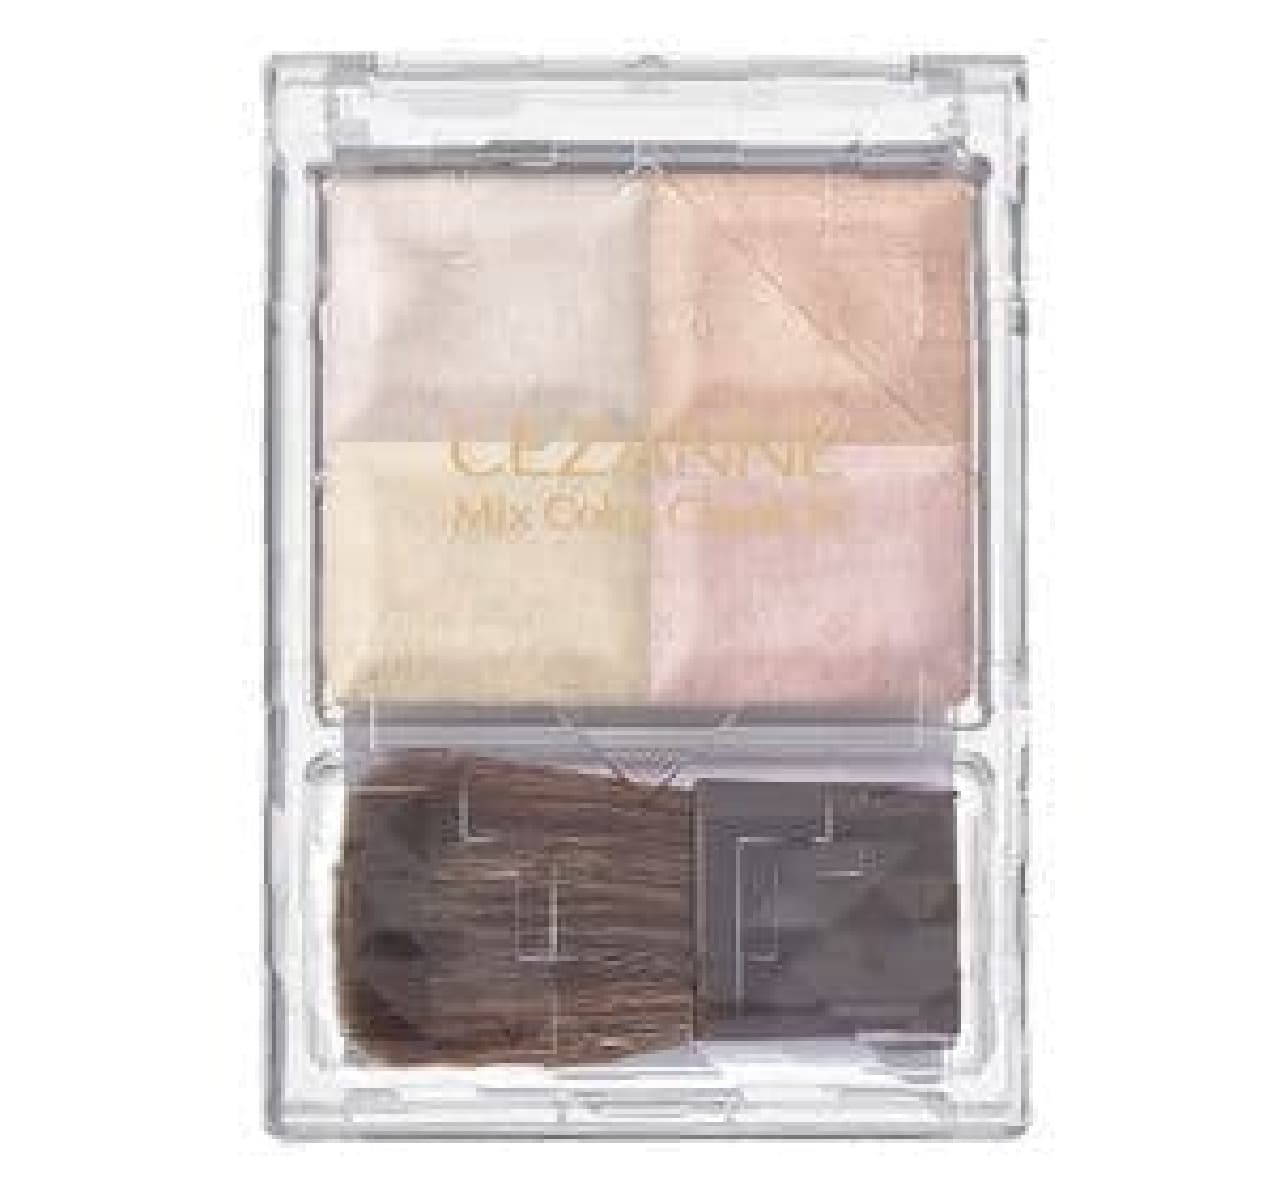 Cezanne "Mixed Color Cheek N 10 Pale Highlight" "Ultra Fine Core Eyebrow 01 Light Brown"